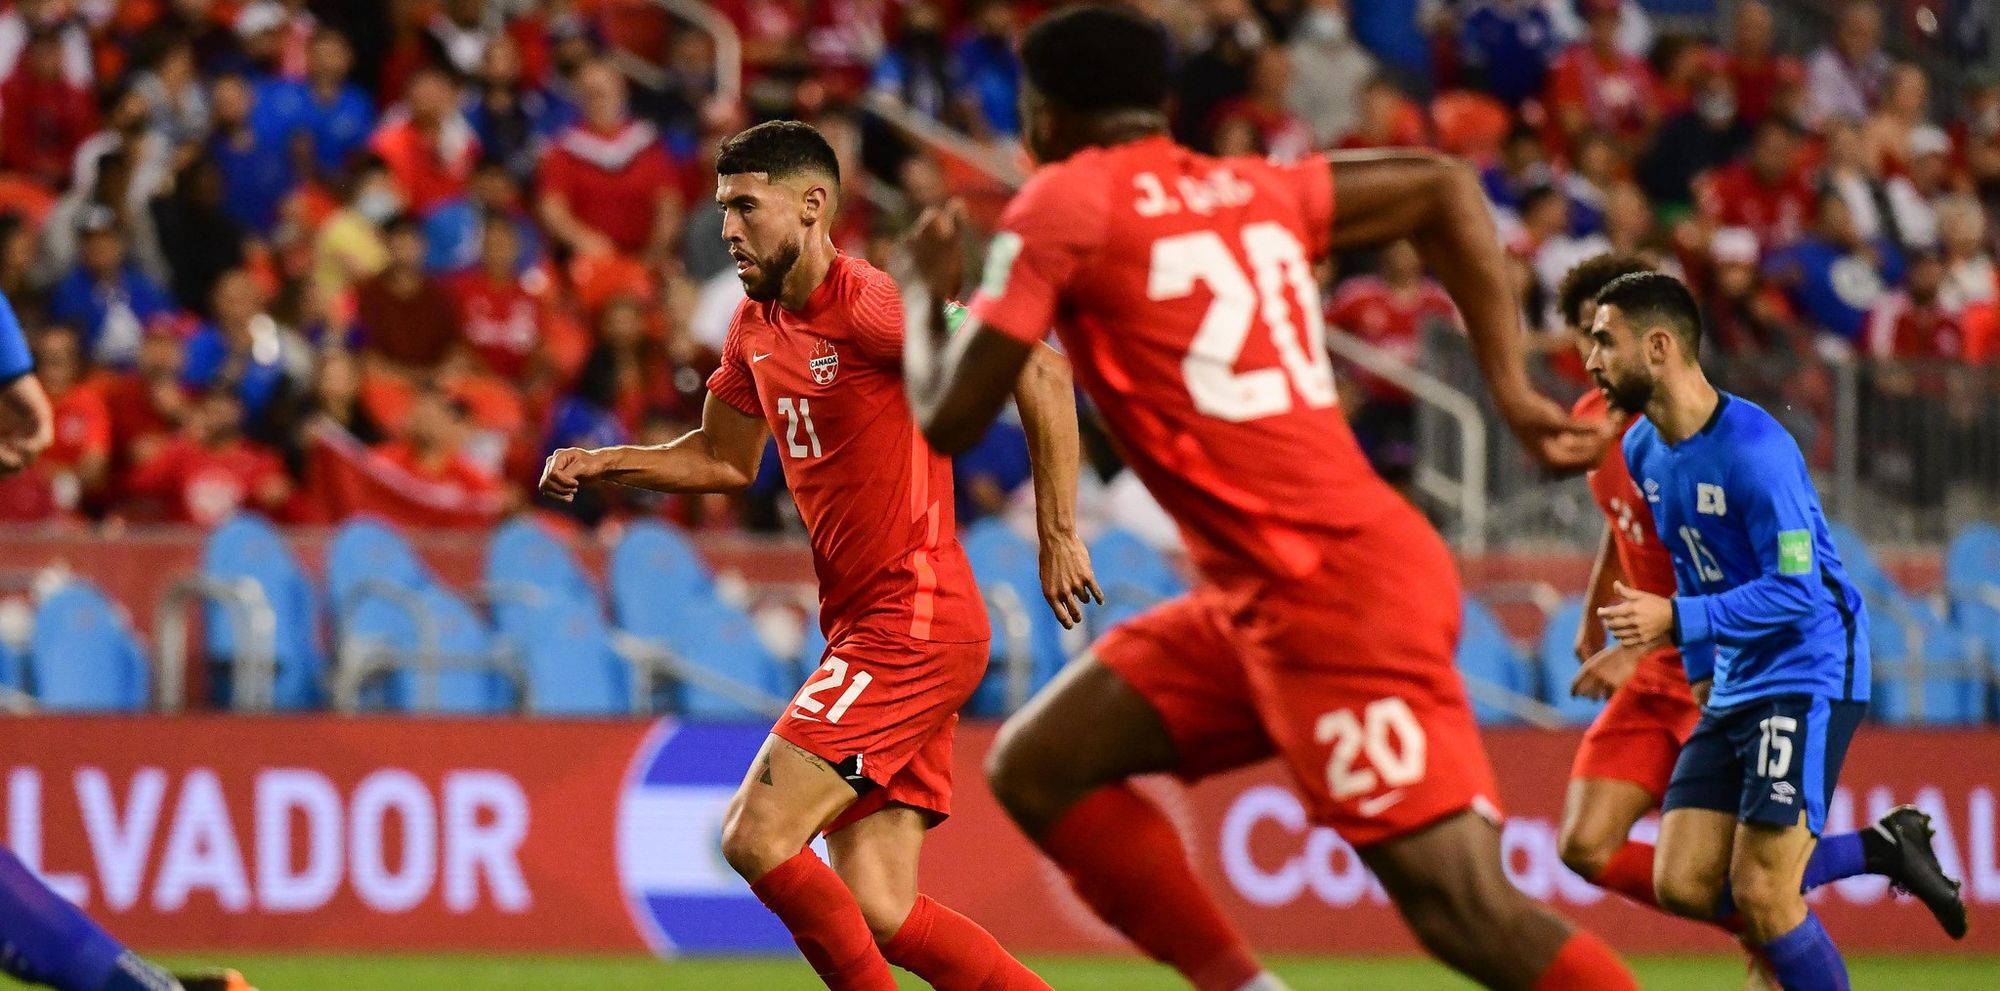 Osorio rises to Herdman's challenge to take more on his shoulders for Canada